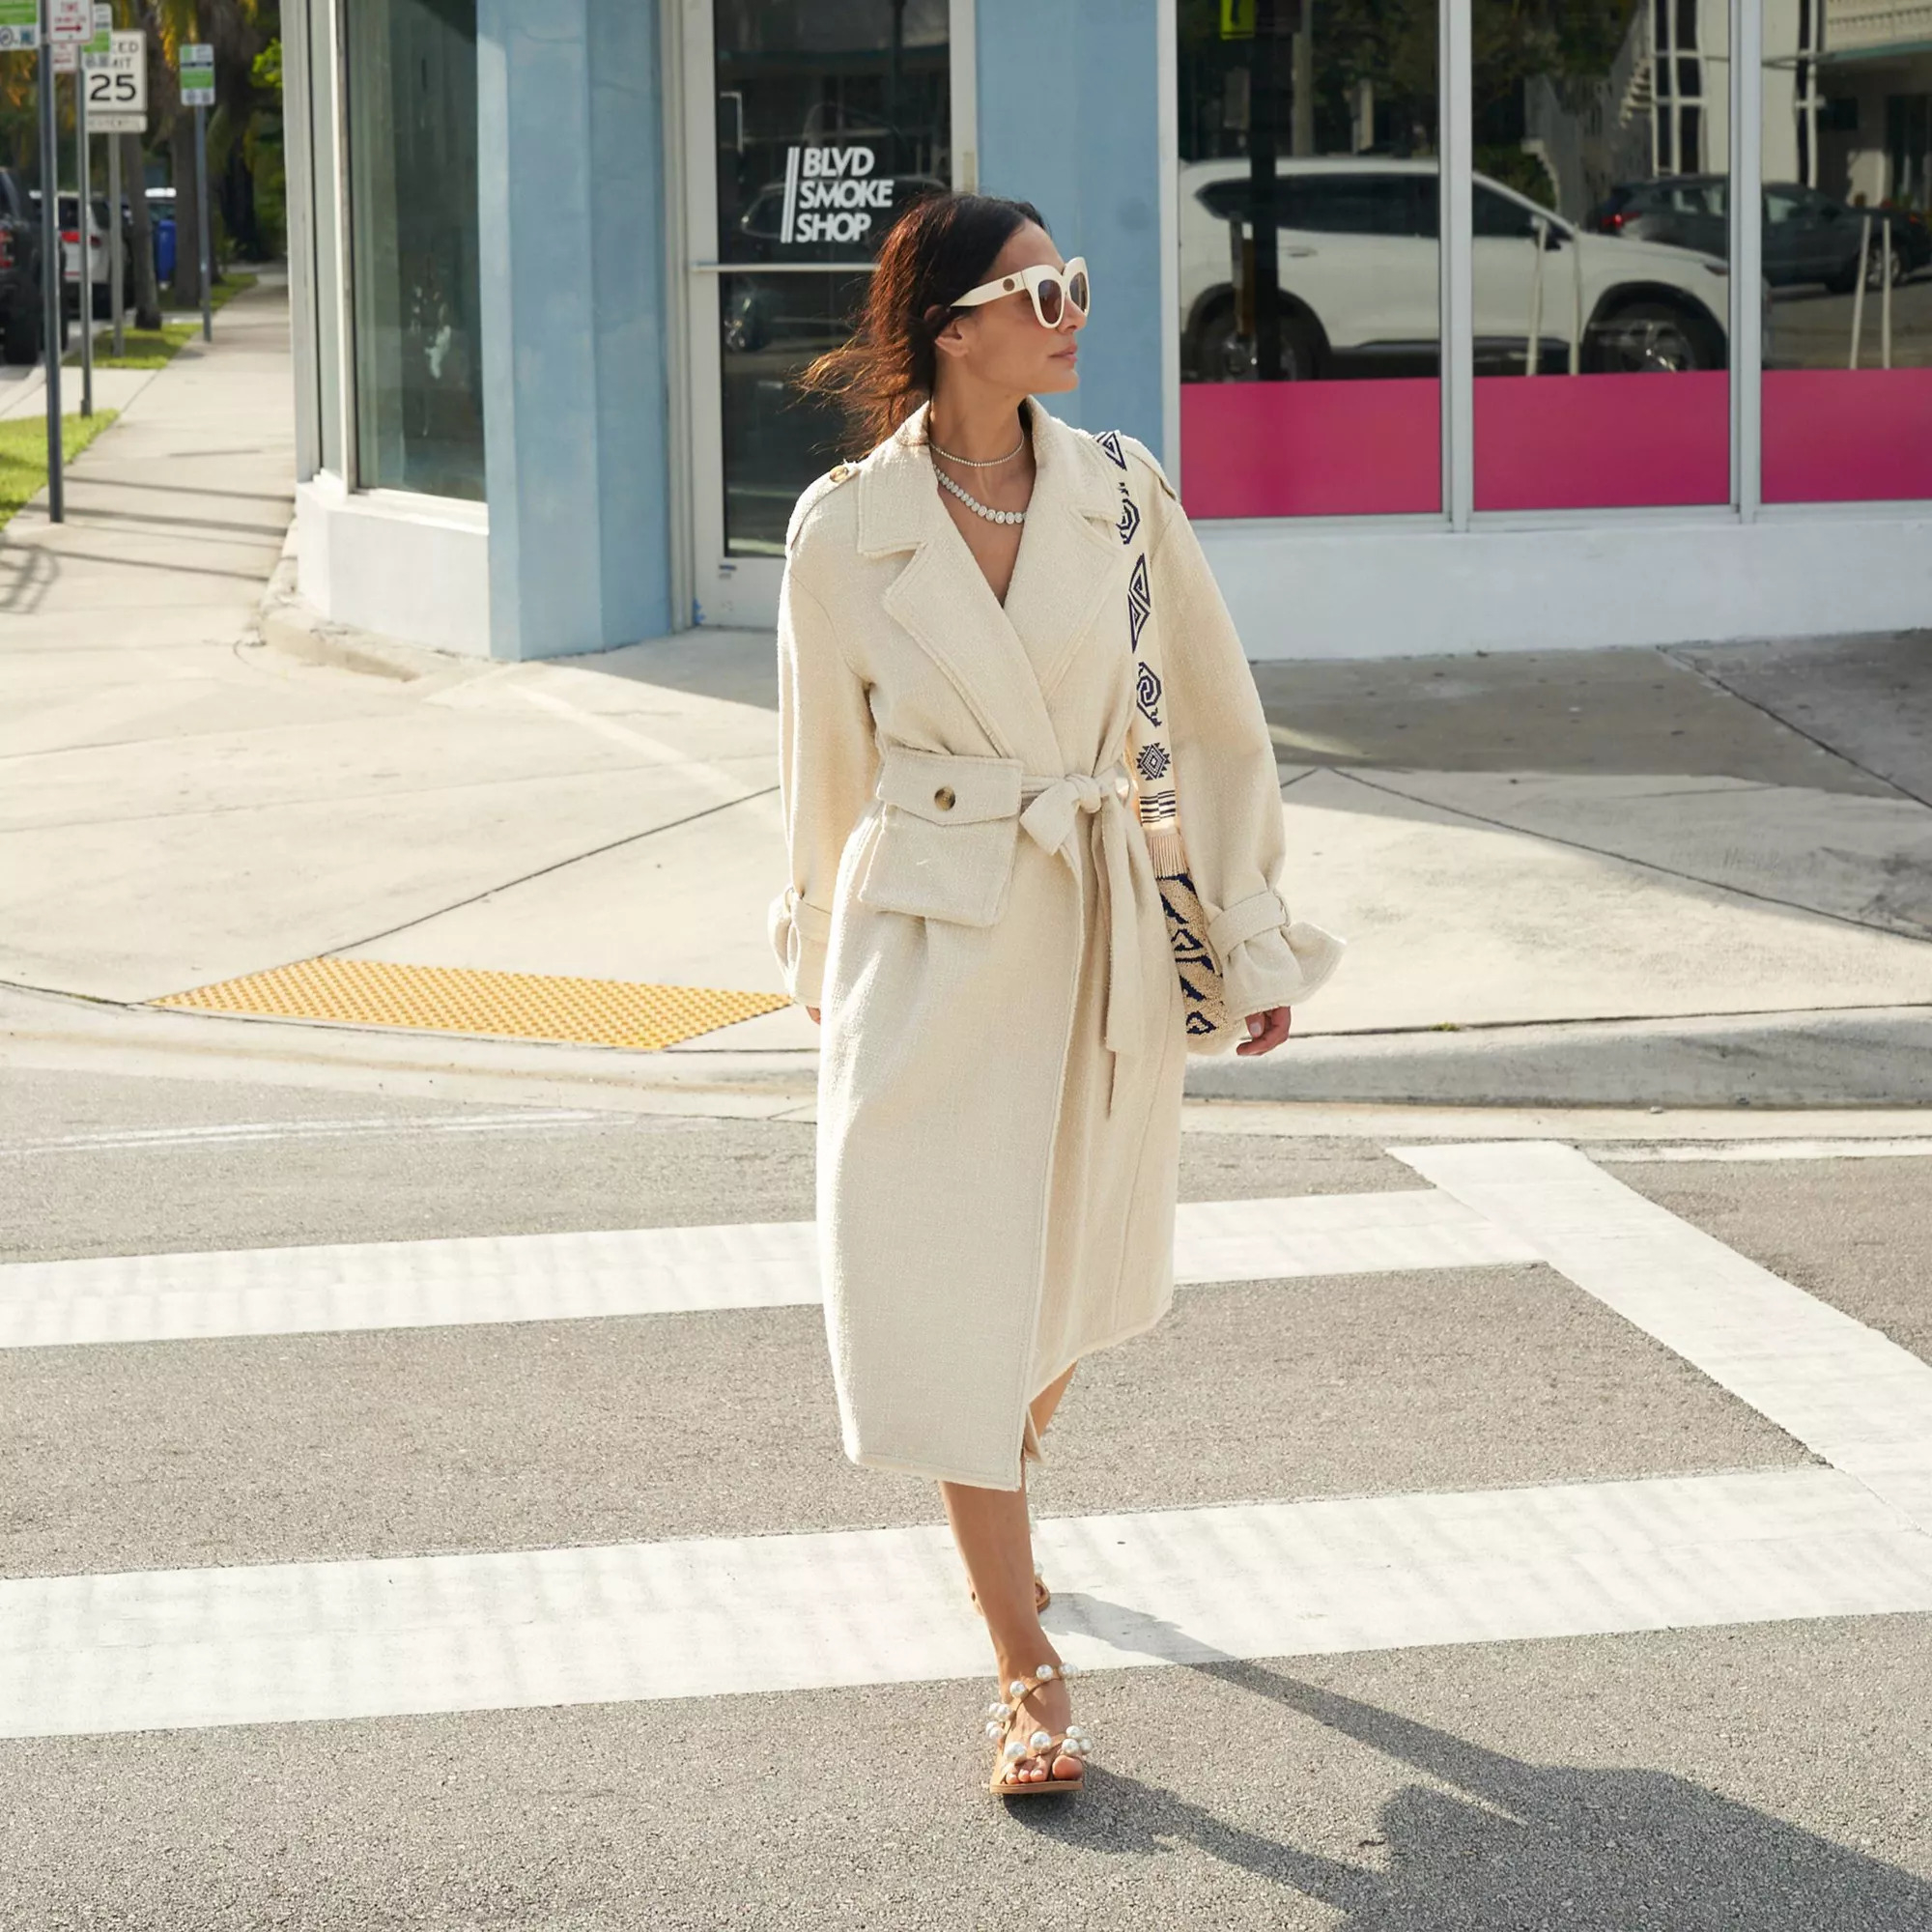 Model wearing the below knee-length beige trench coat in a mid-weight boucle fabric, dropped shoulders, and tie-waist